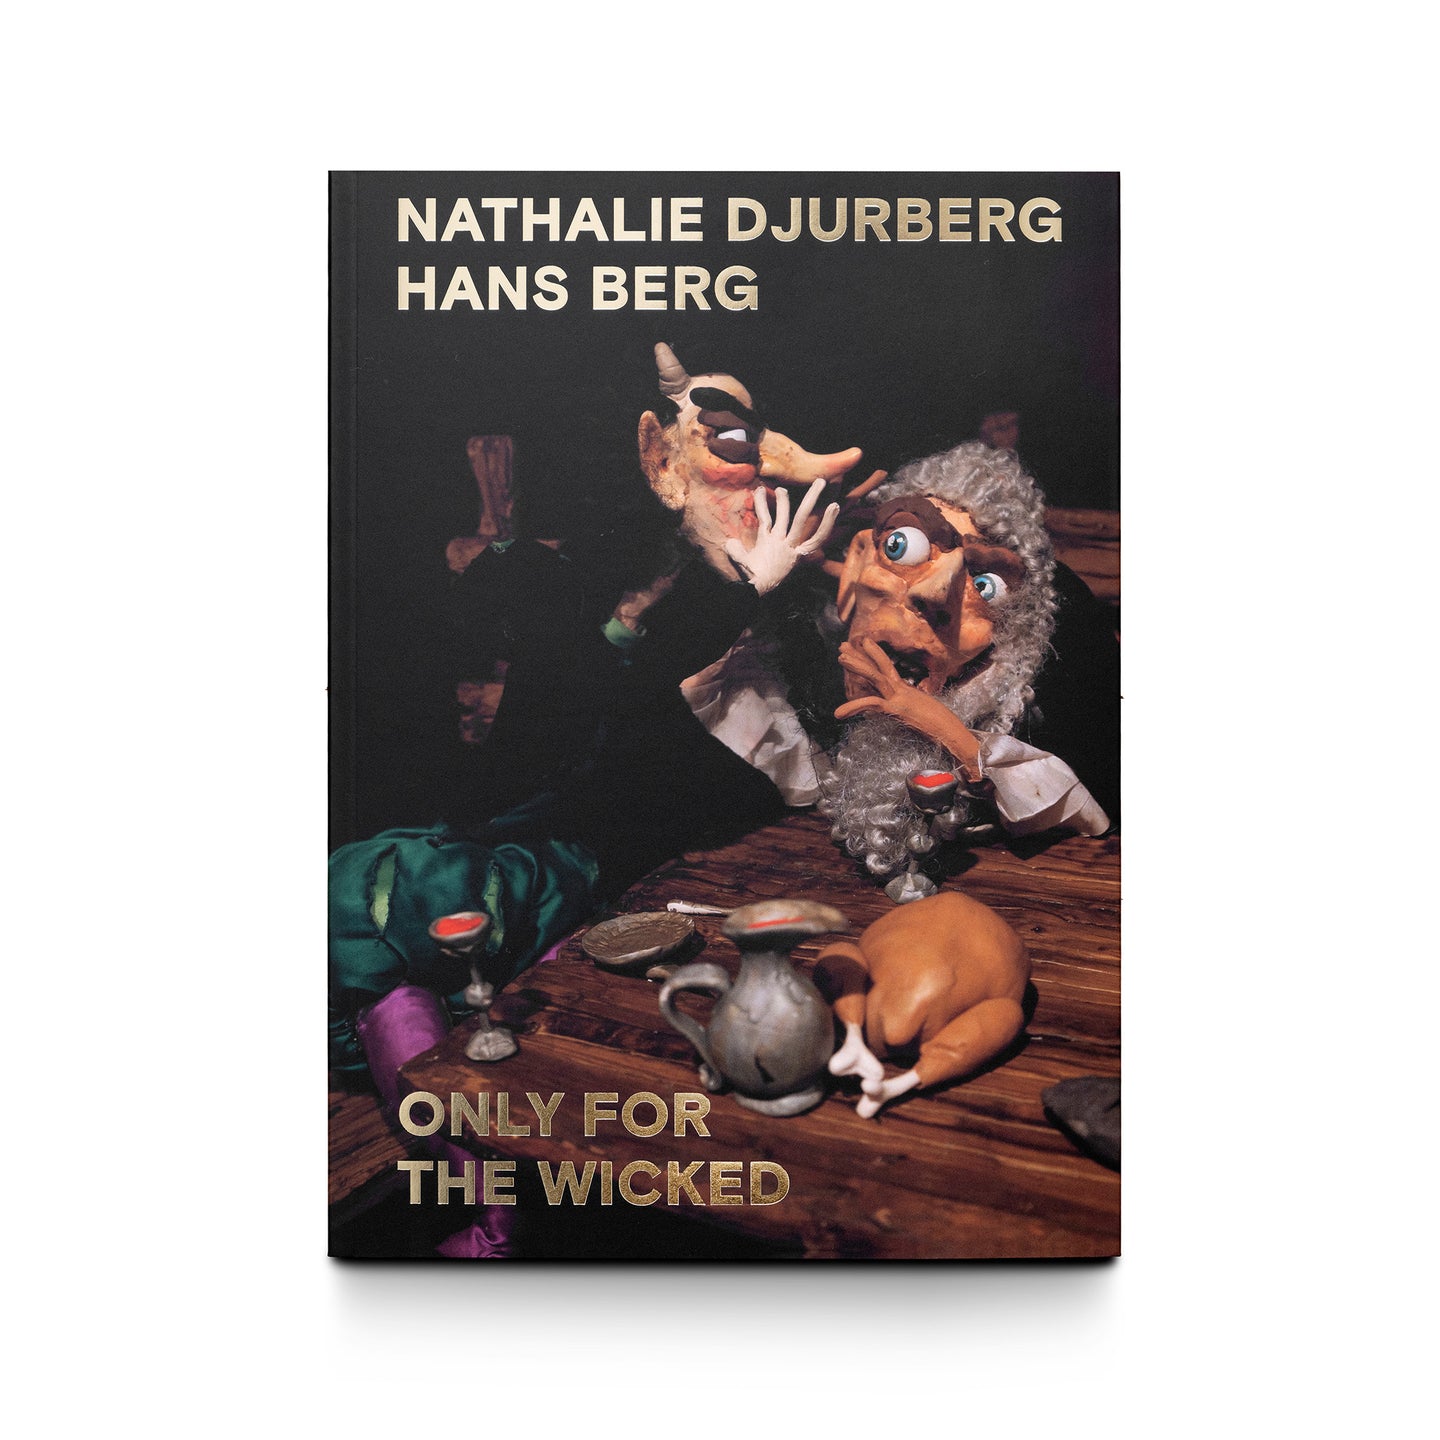 NATHALIE DJURBERG & HANS BERG: ONLY FOR THE WICKED